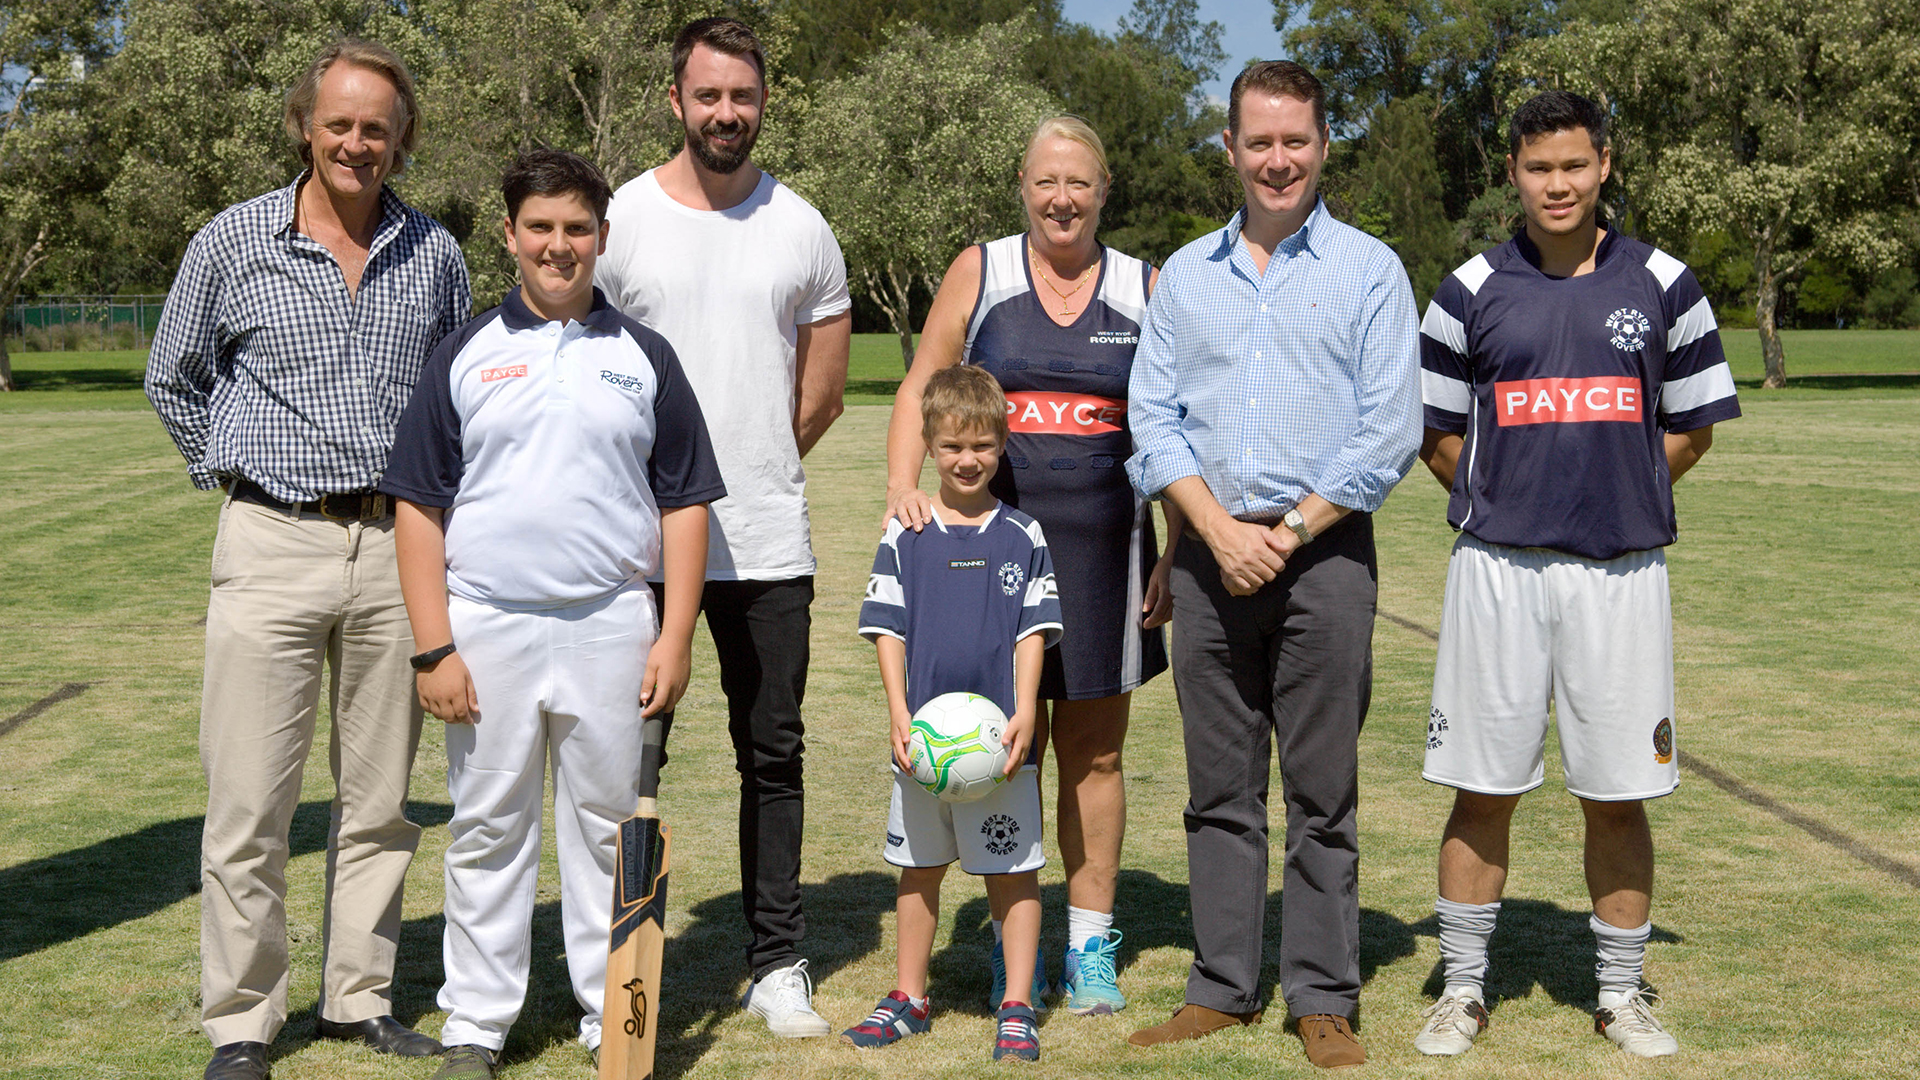 West Ryde Rovers secure record sponsorship with PAYCE